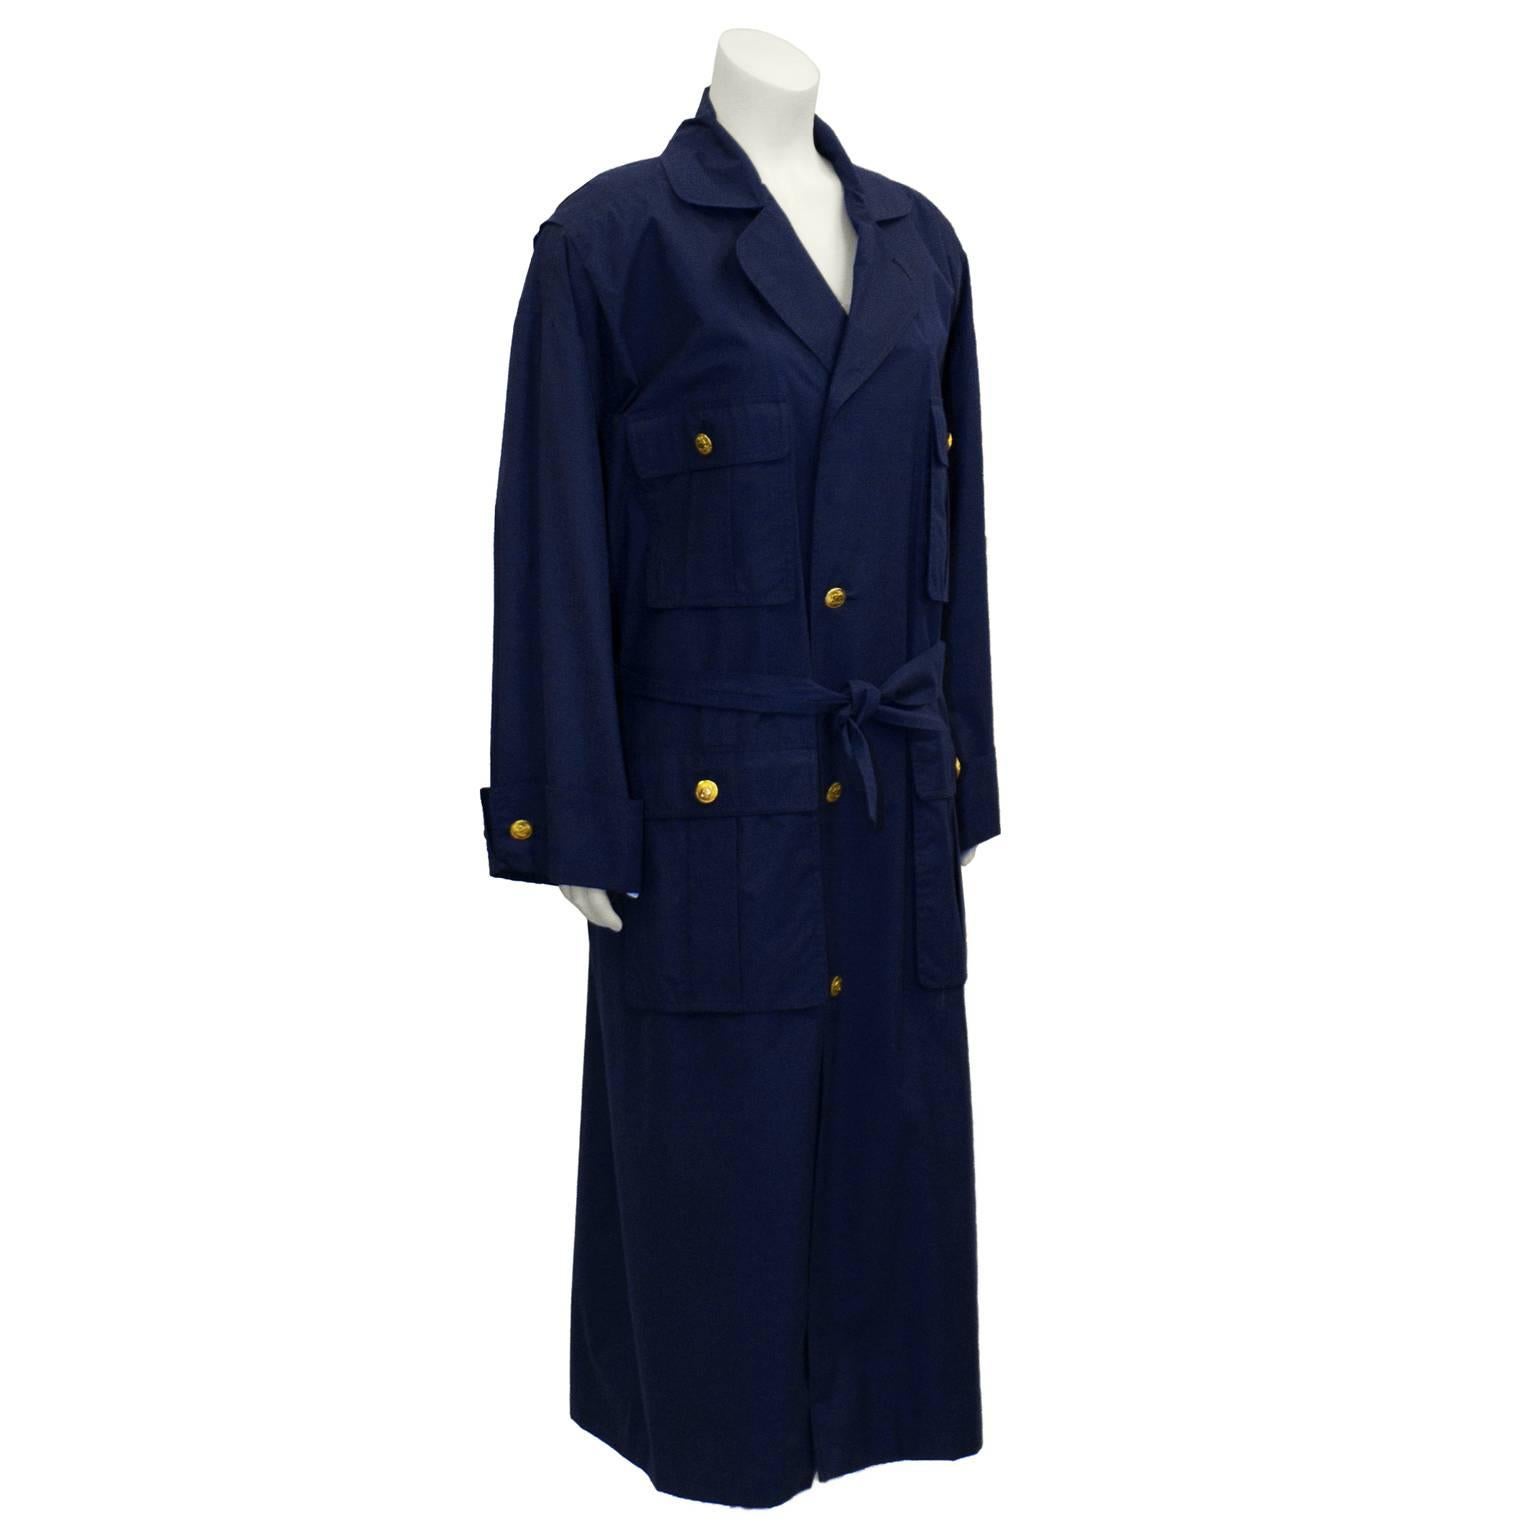 Stunning navy Chanel belted trench coat dates from the 1980's. Features notched lapels, front button closure, gold buttons with CC logo. Two vertically aligned oversized patch pockets on each side with single button on each flap. Loose fitting